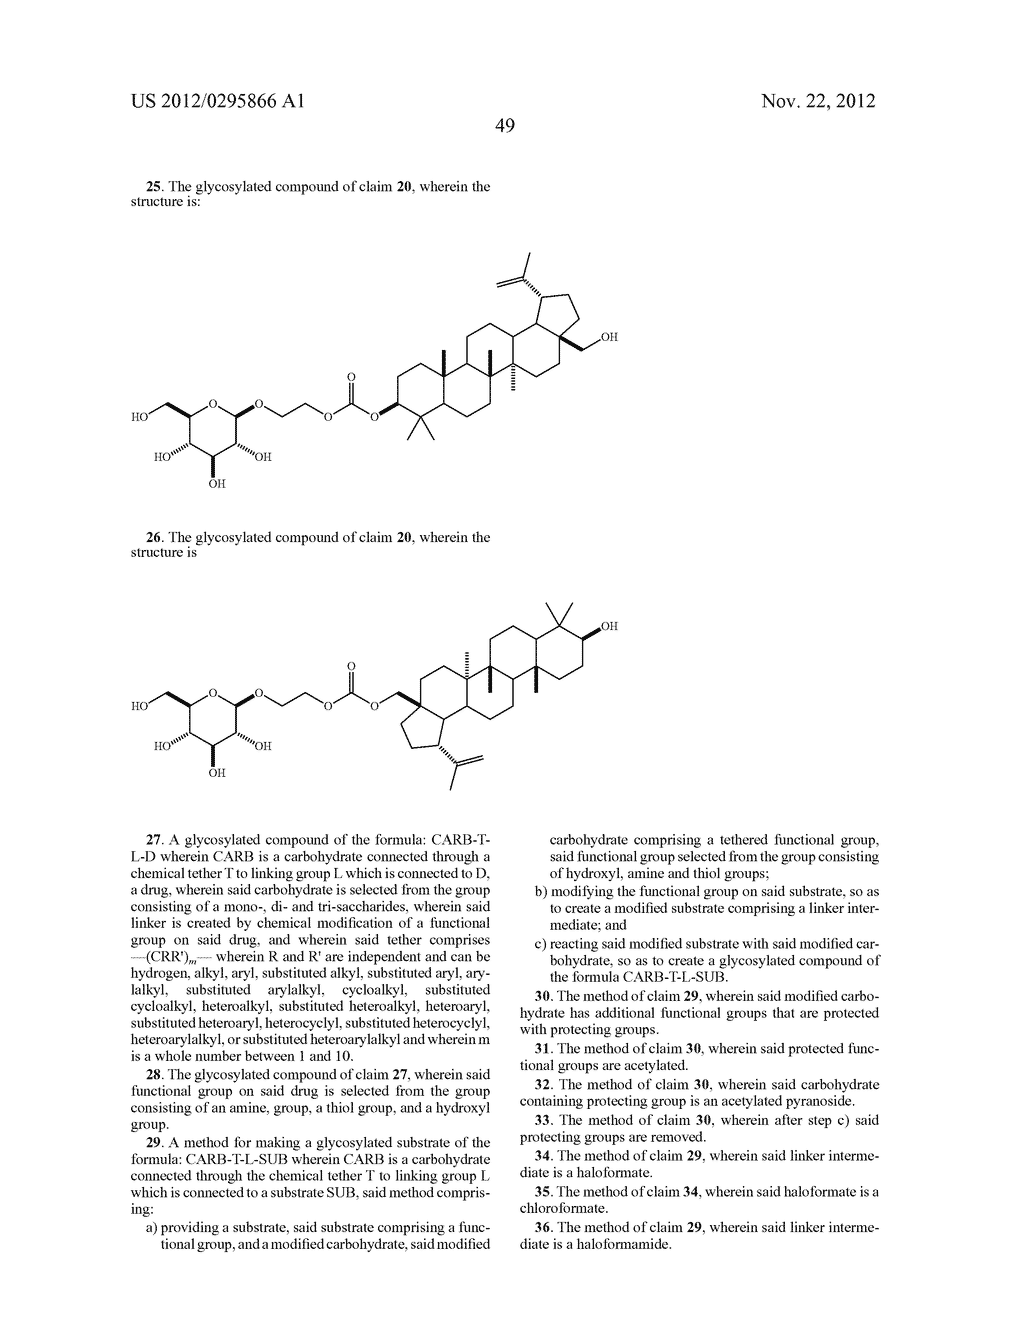 Synthesis And Use Of Glycoside Pro-Drug Analogs - diagram, schematic, and image 74